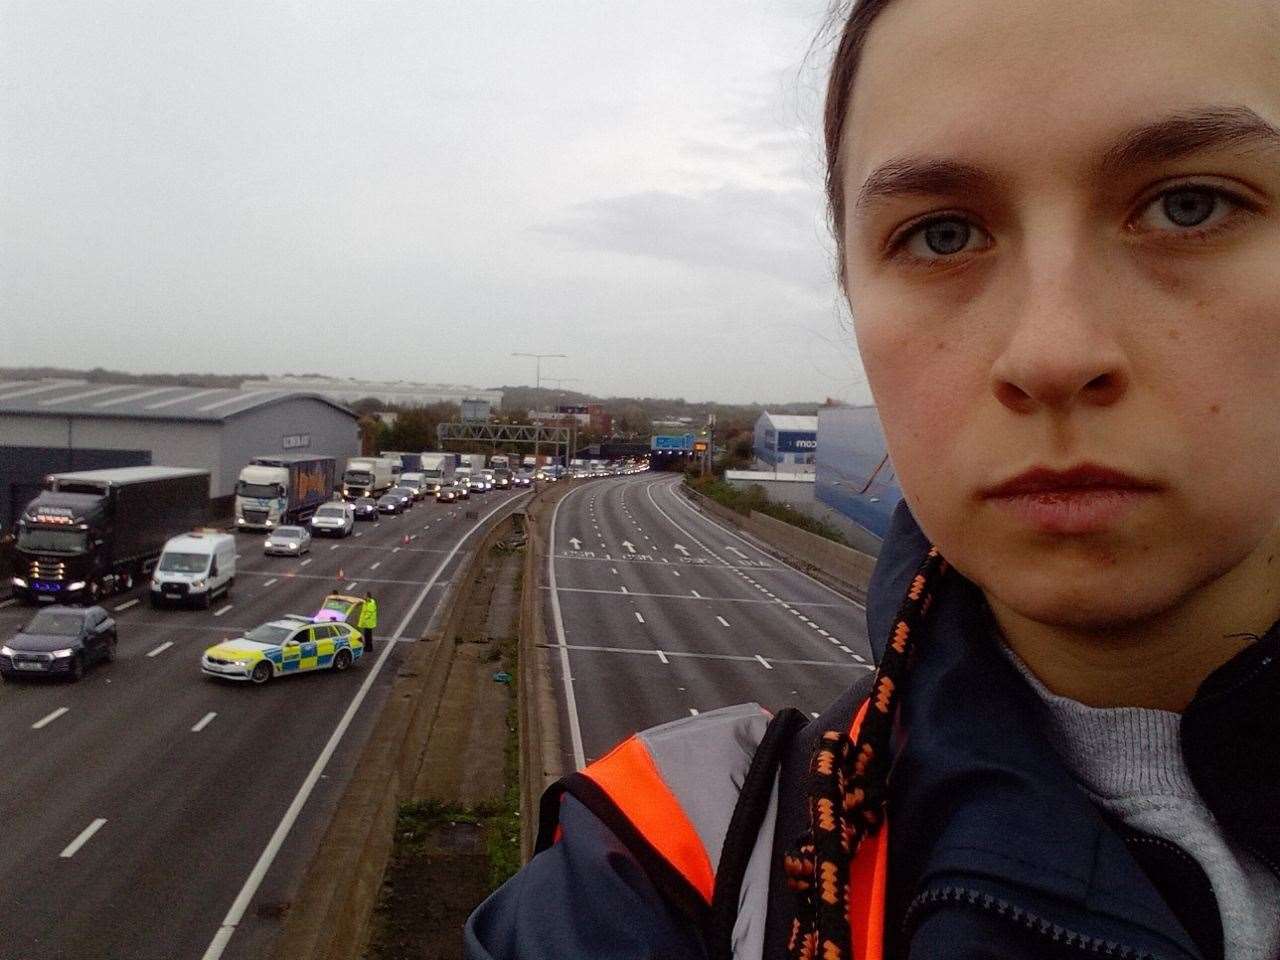 A Just Stop Oil protester on a motorway gantry